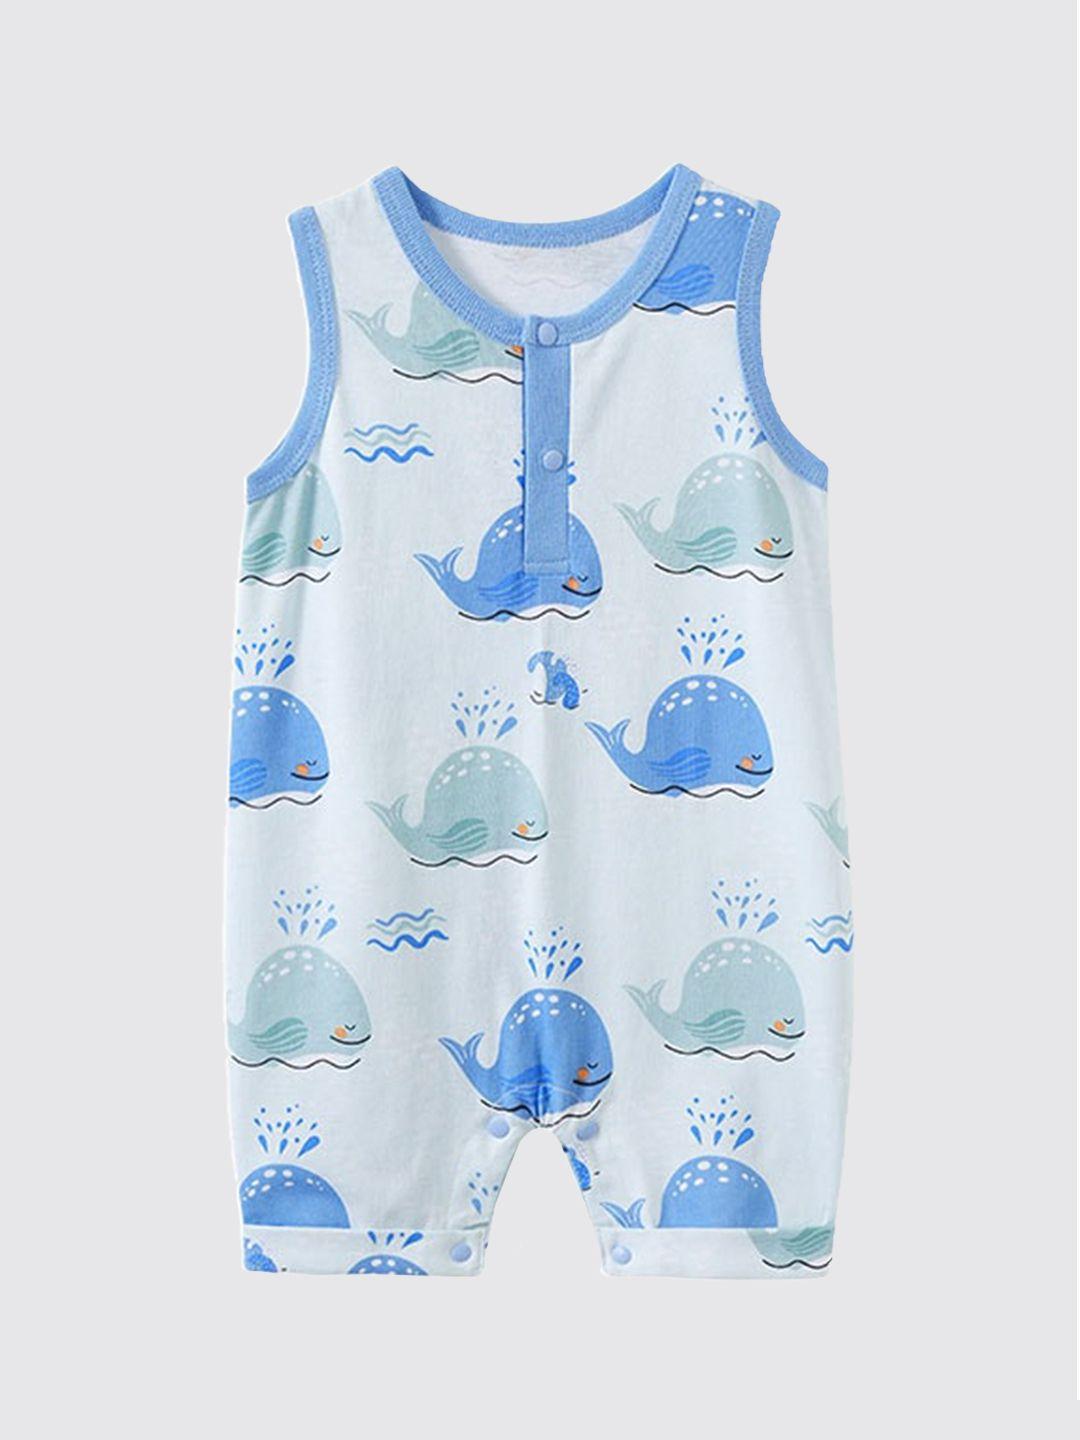 stylecast infant boys grey & blue printed cotton rompers